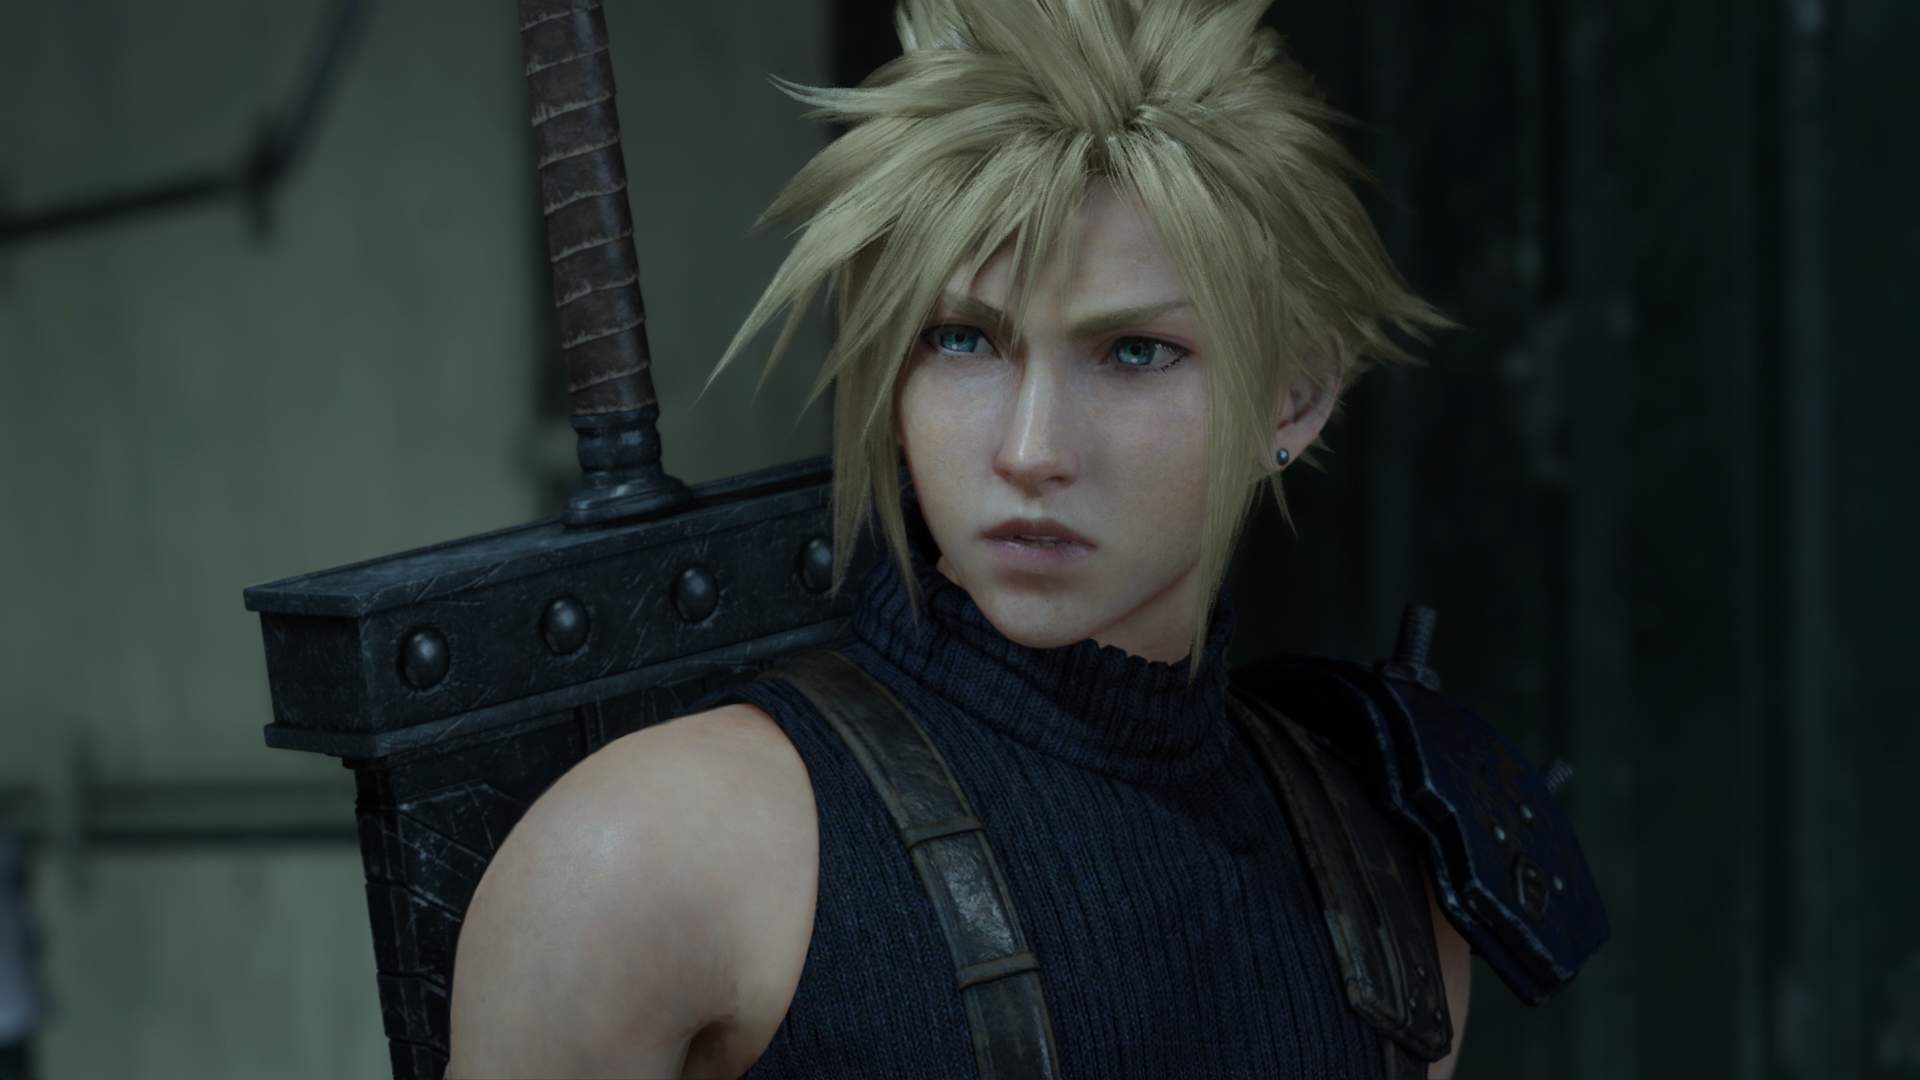 Final Fantasy VII Remake: How to Get Blue Hair for Cloud Strife - wide 8